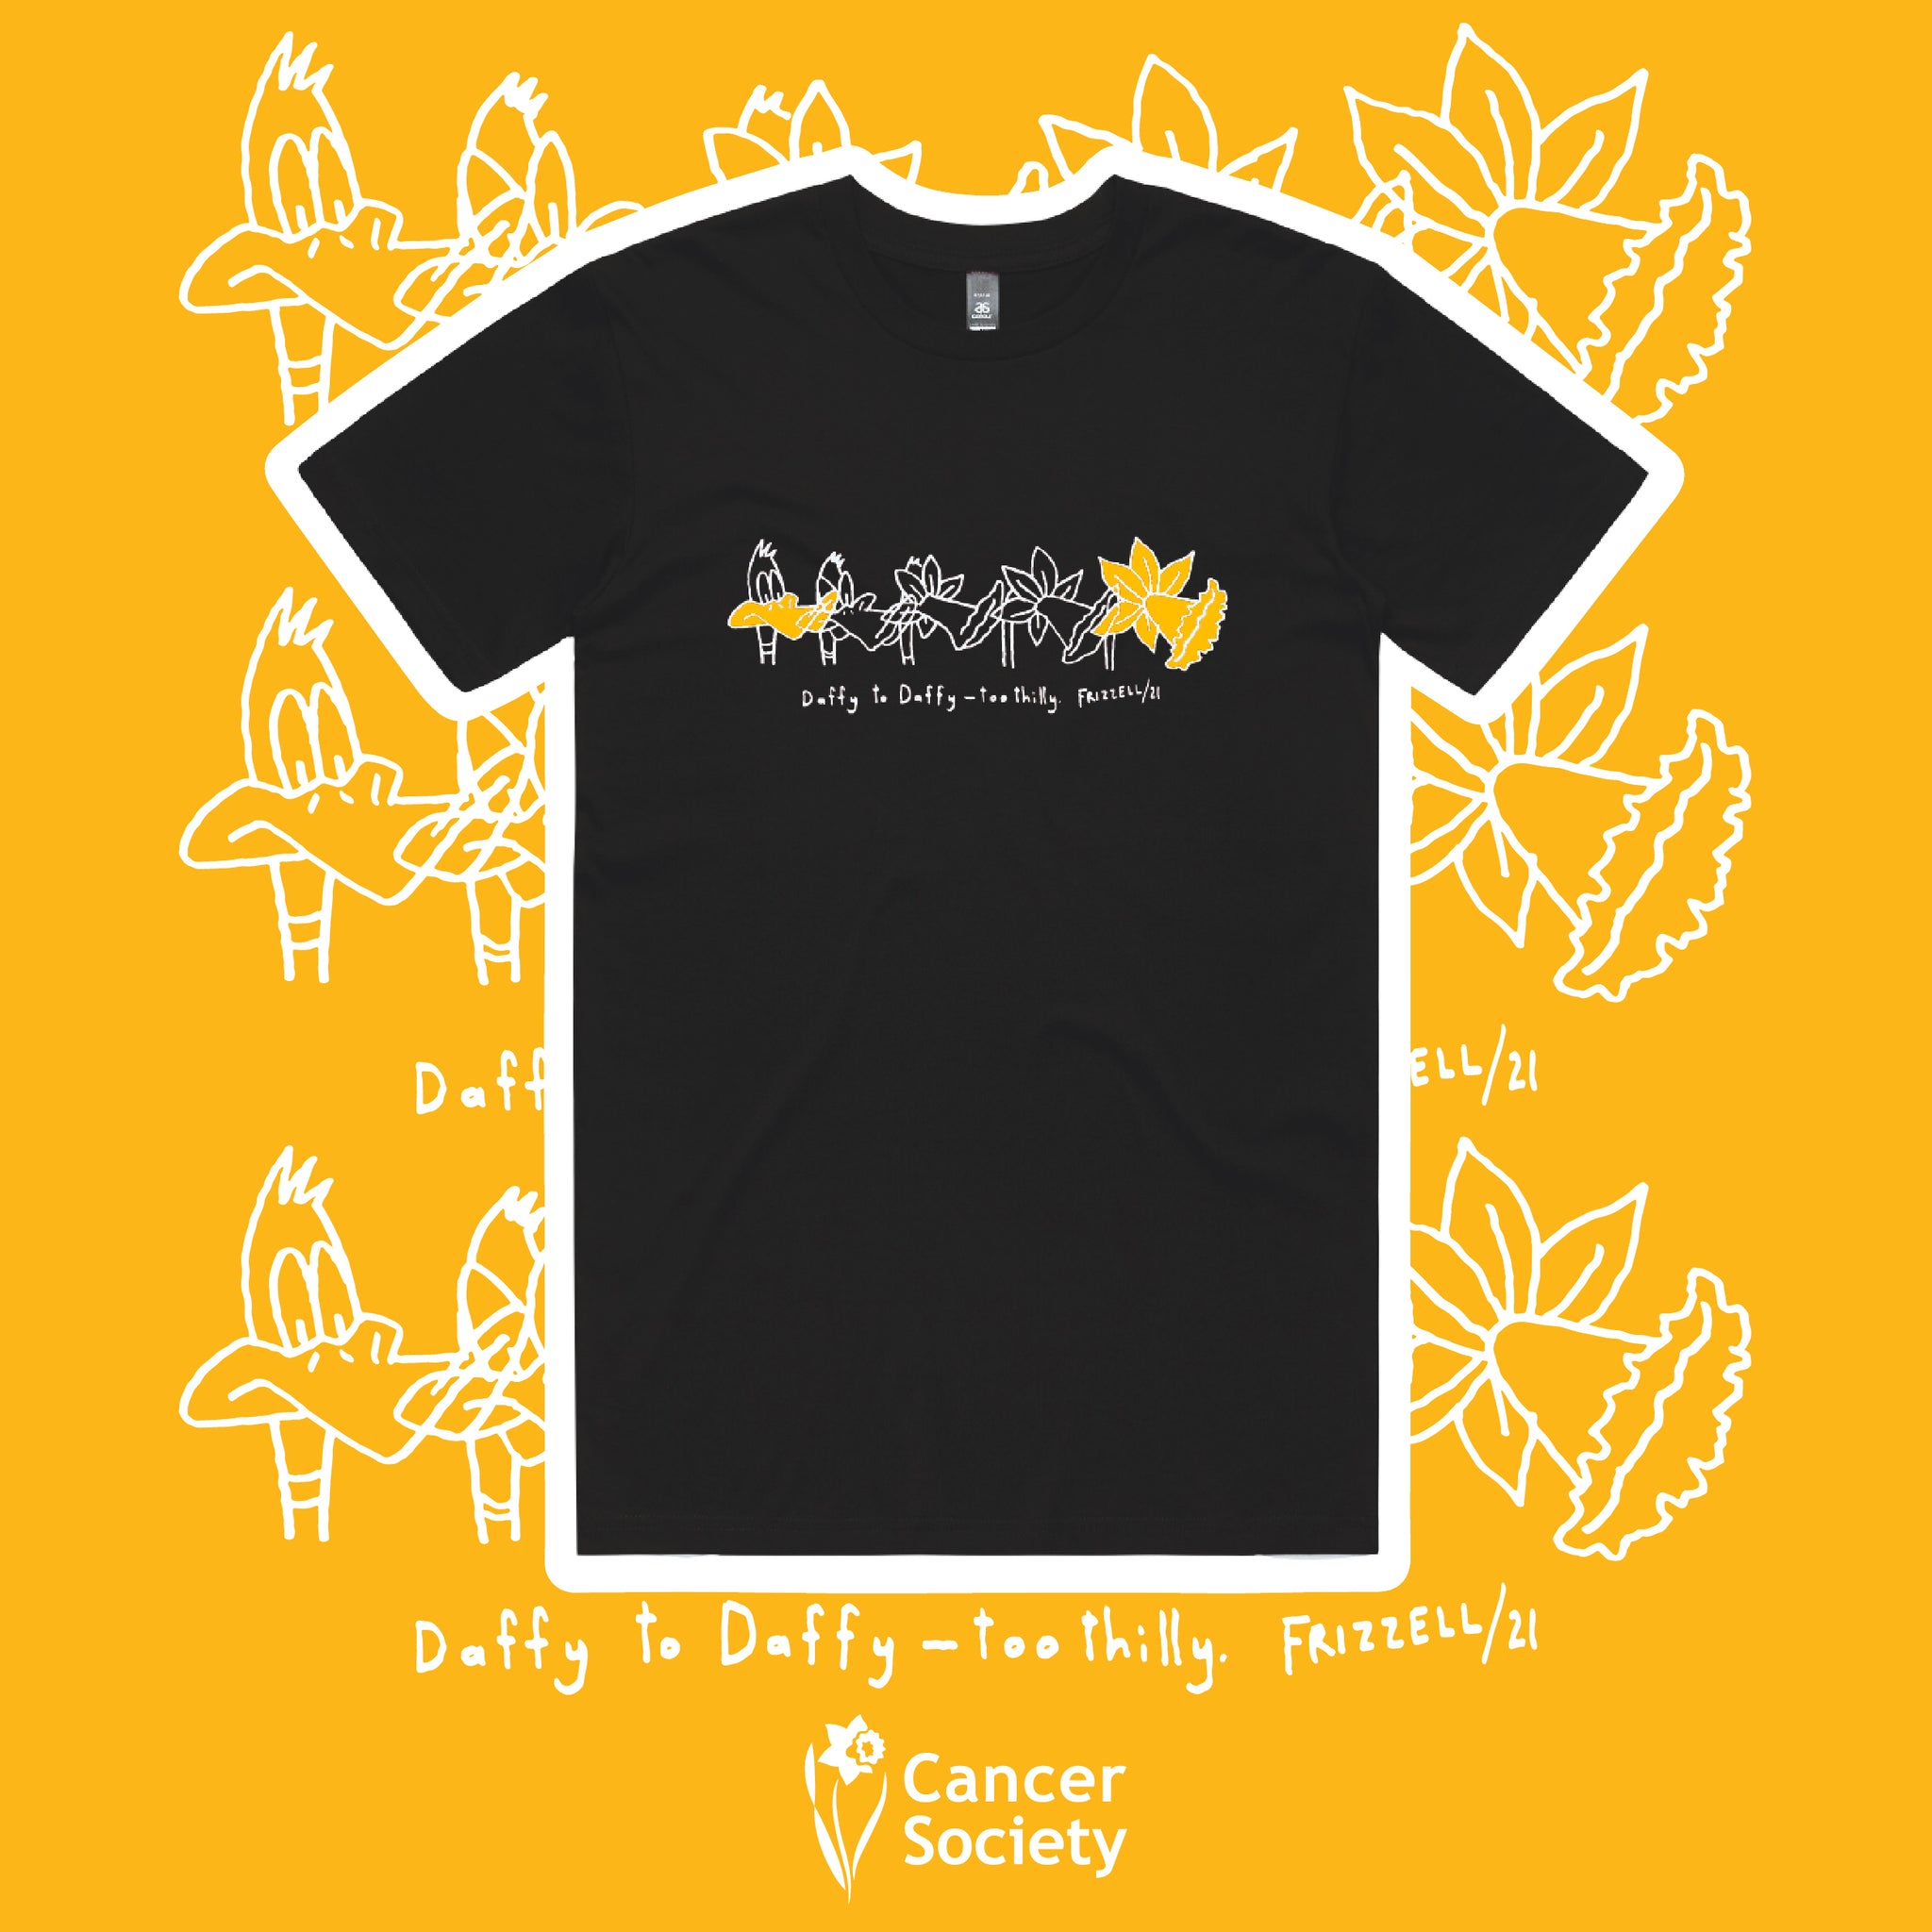 NZ cancer society online fundraising store 